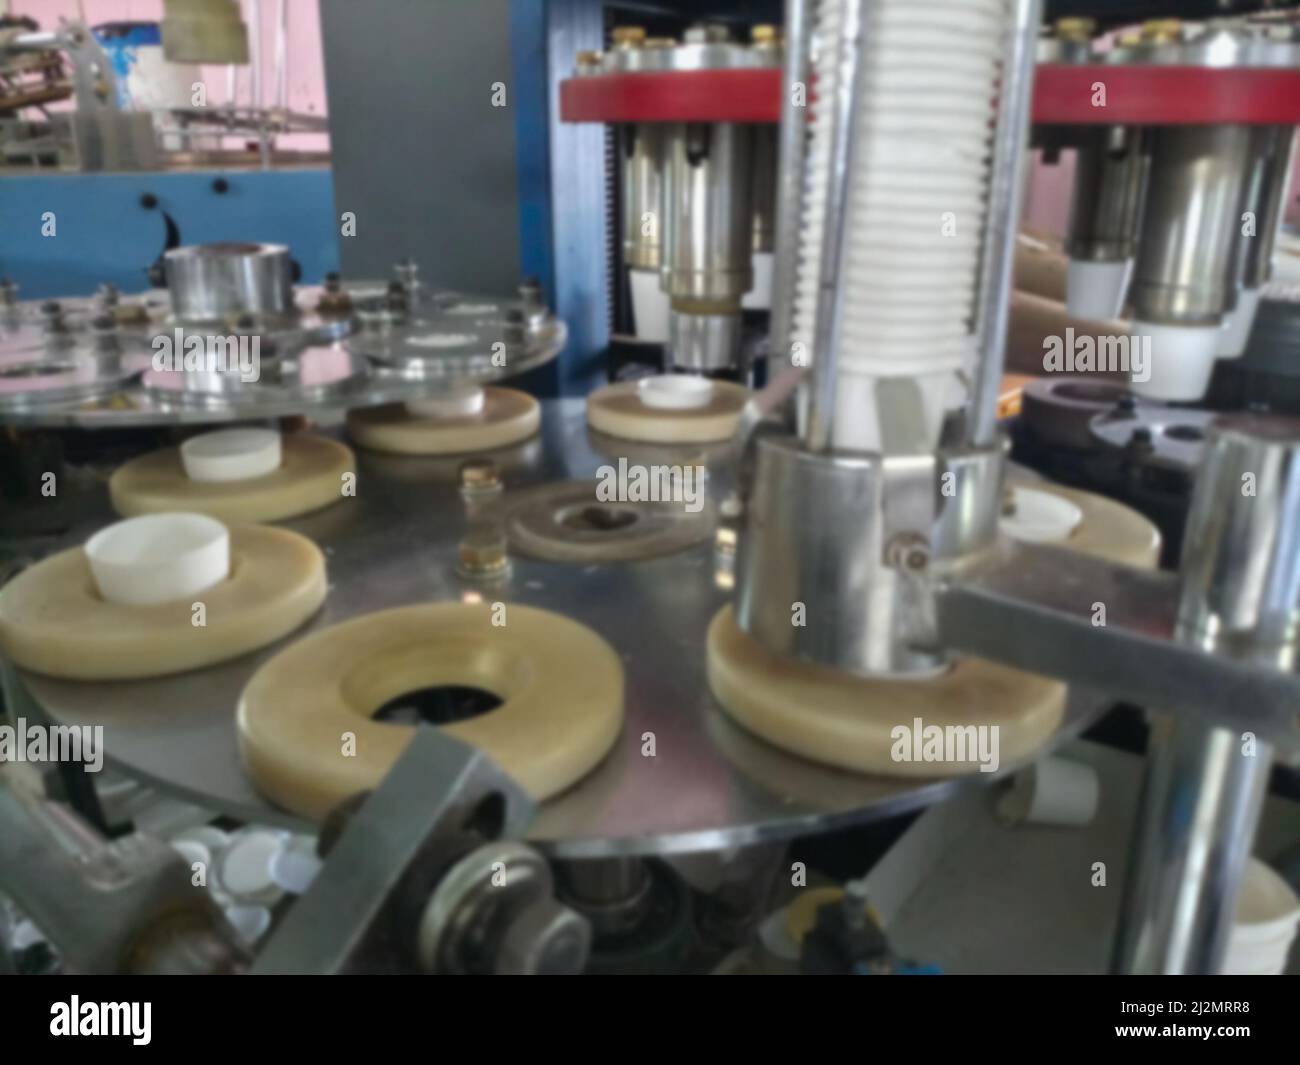 Blurred image of Paper cups are being made from paper, using paper cup manufacturing machines, Inside view of a running cup manufacturing unit. Stock Photo